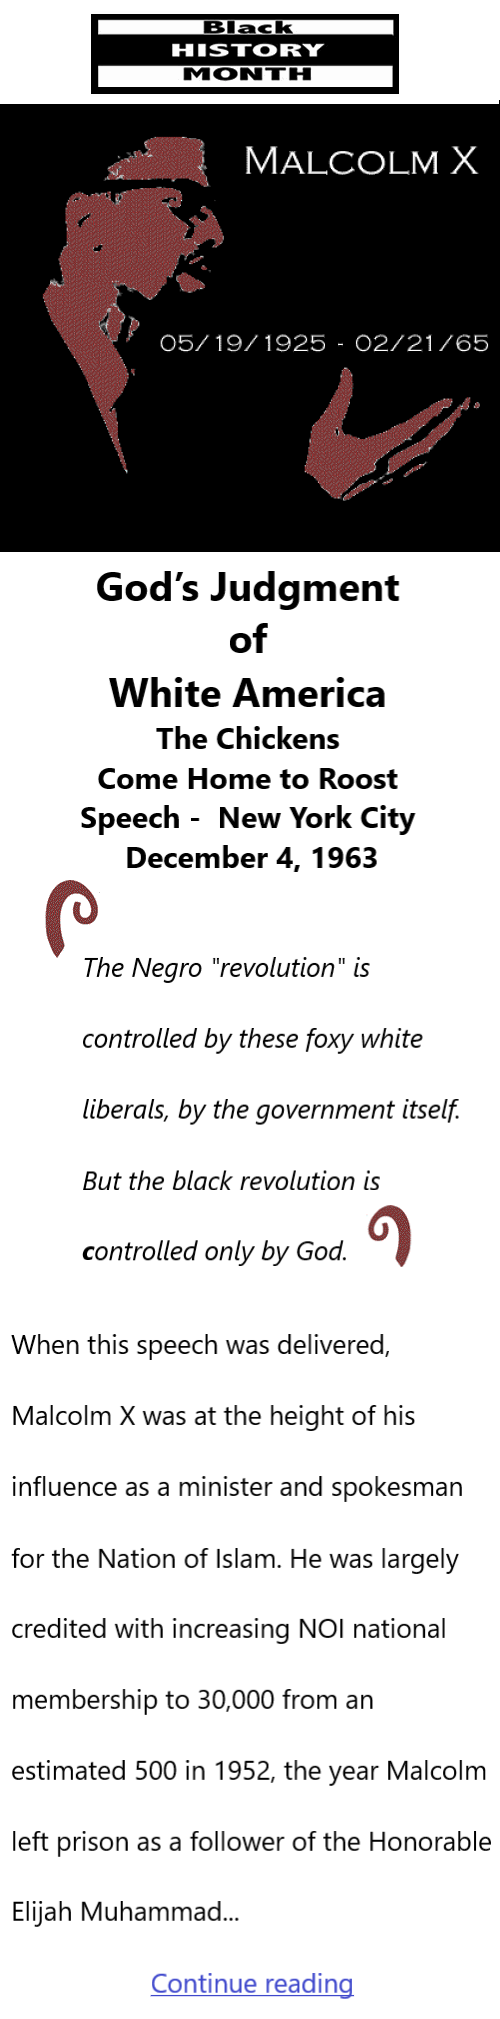 BlackCommentator.com Feb 1, 2024 - Issue 986: Black History Month - Malcolm X - God’s Judgment of White America (The Chickens Come Home to Roost) Speech - New York City, December 4, 1963